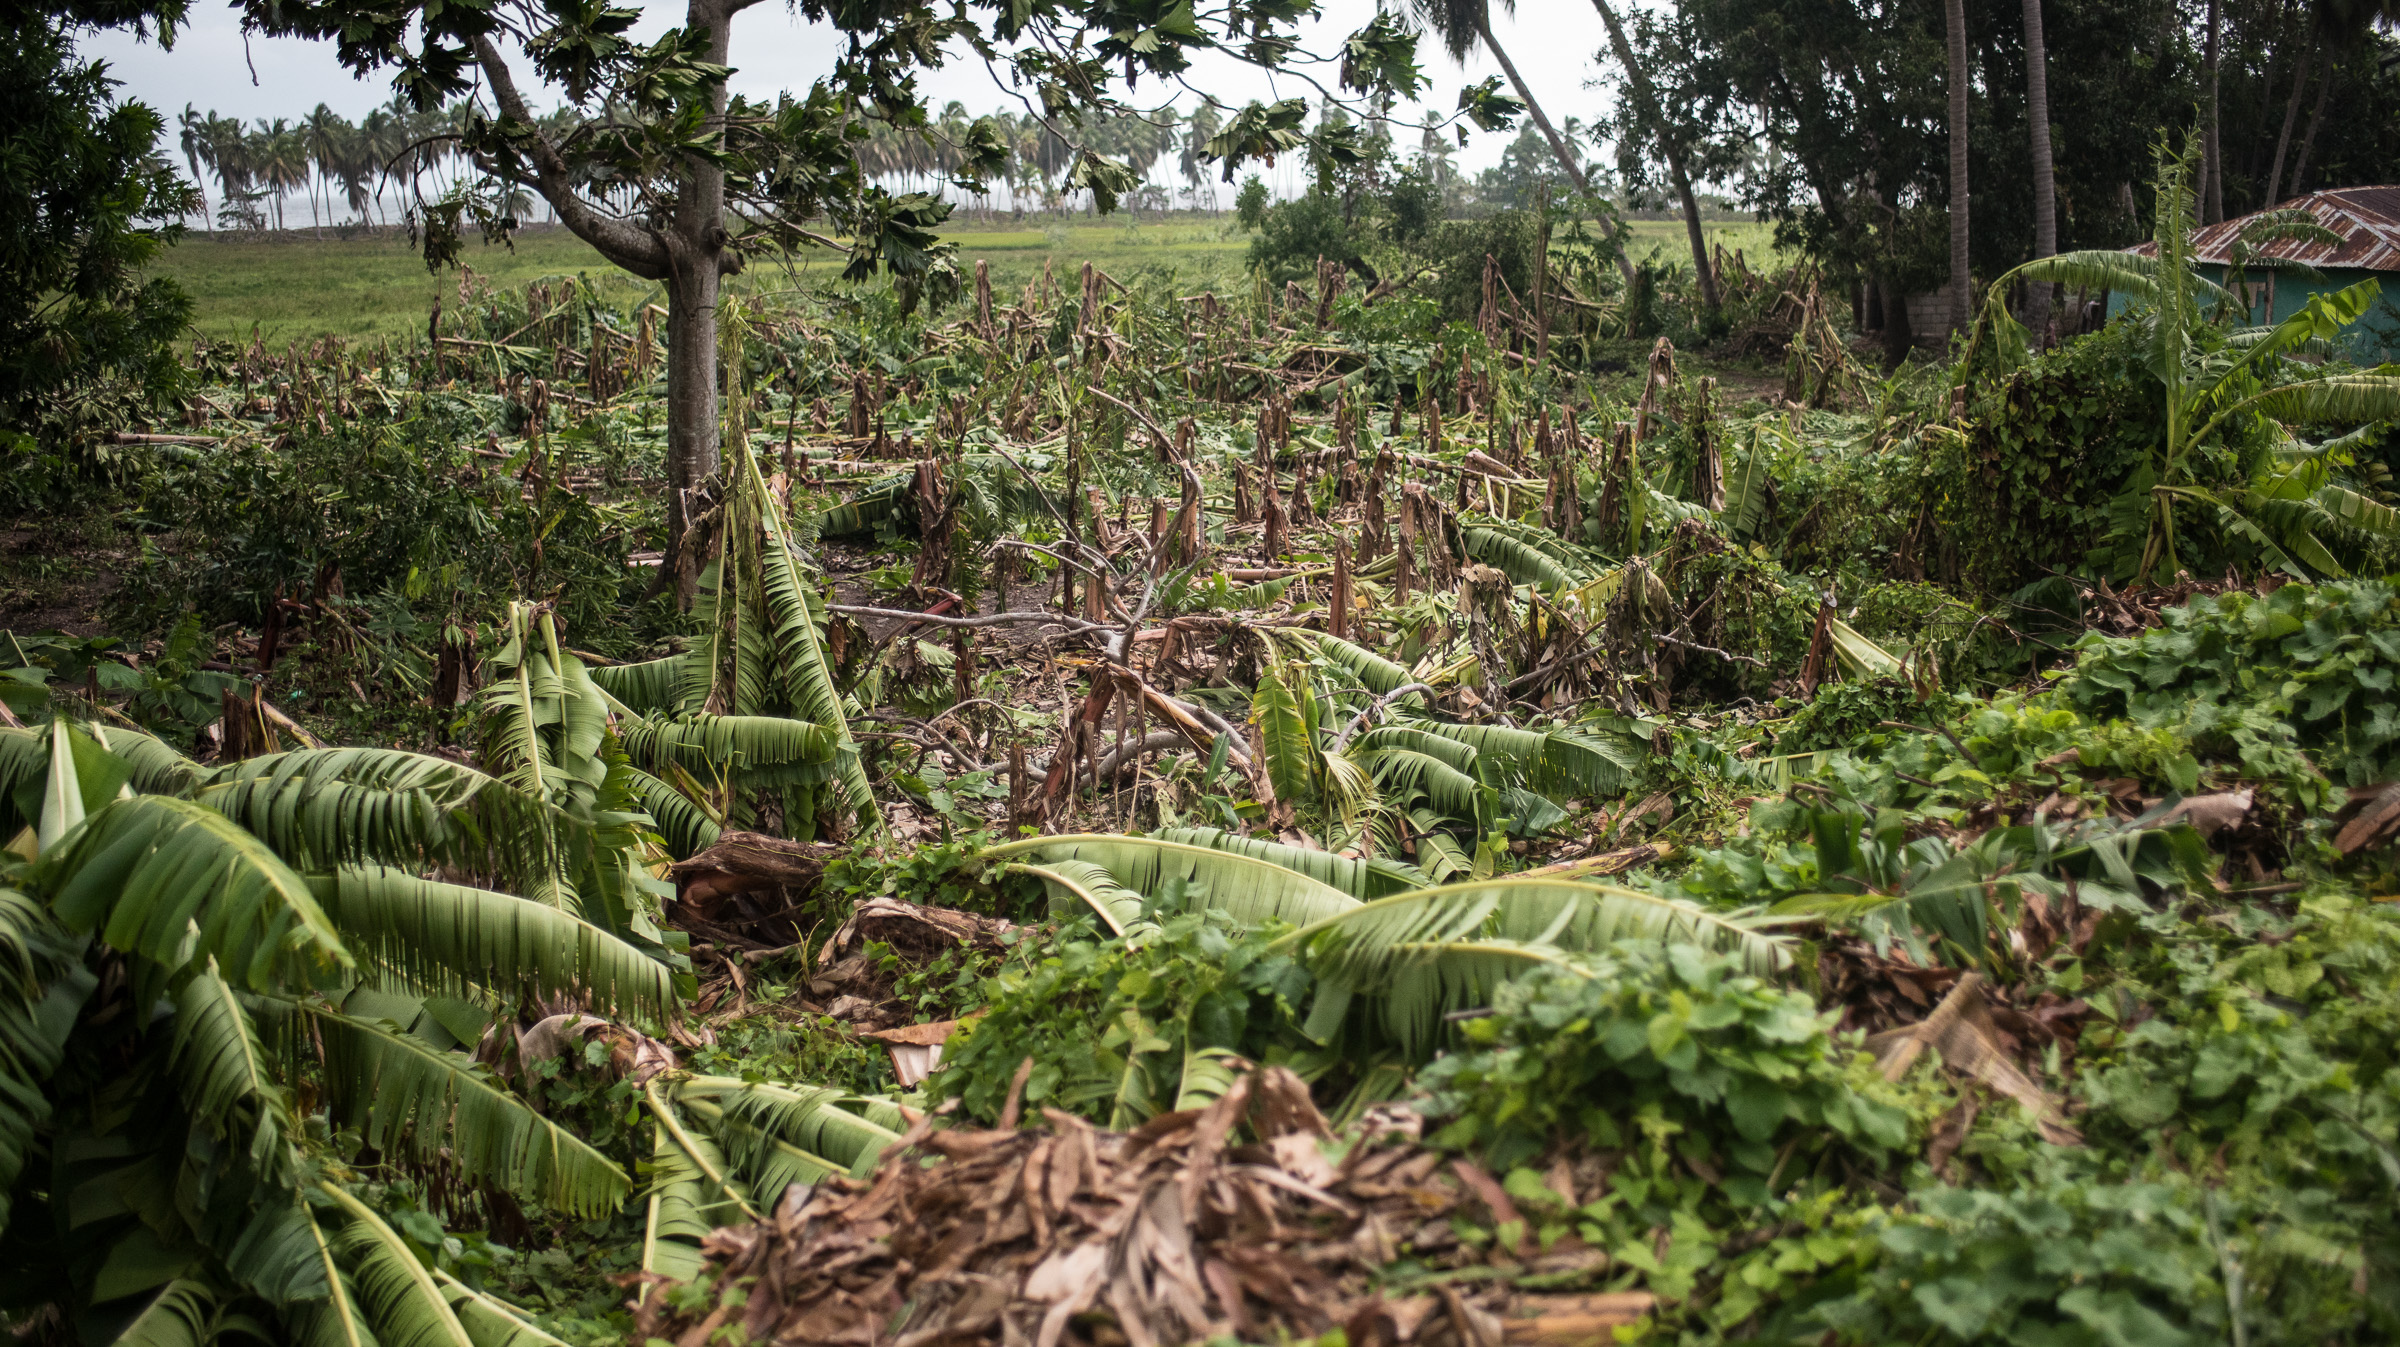 Banana tress and almost all other crops have been destroyed